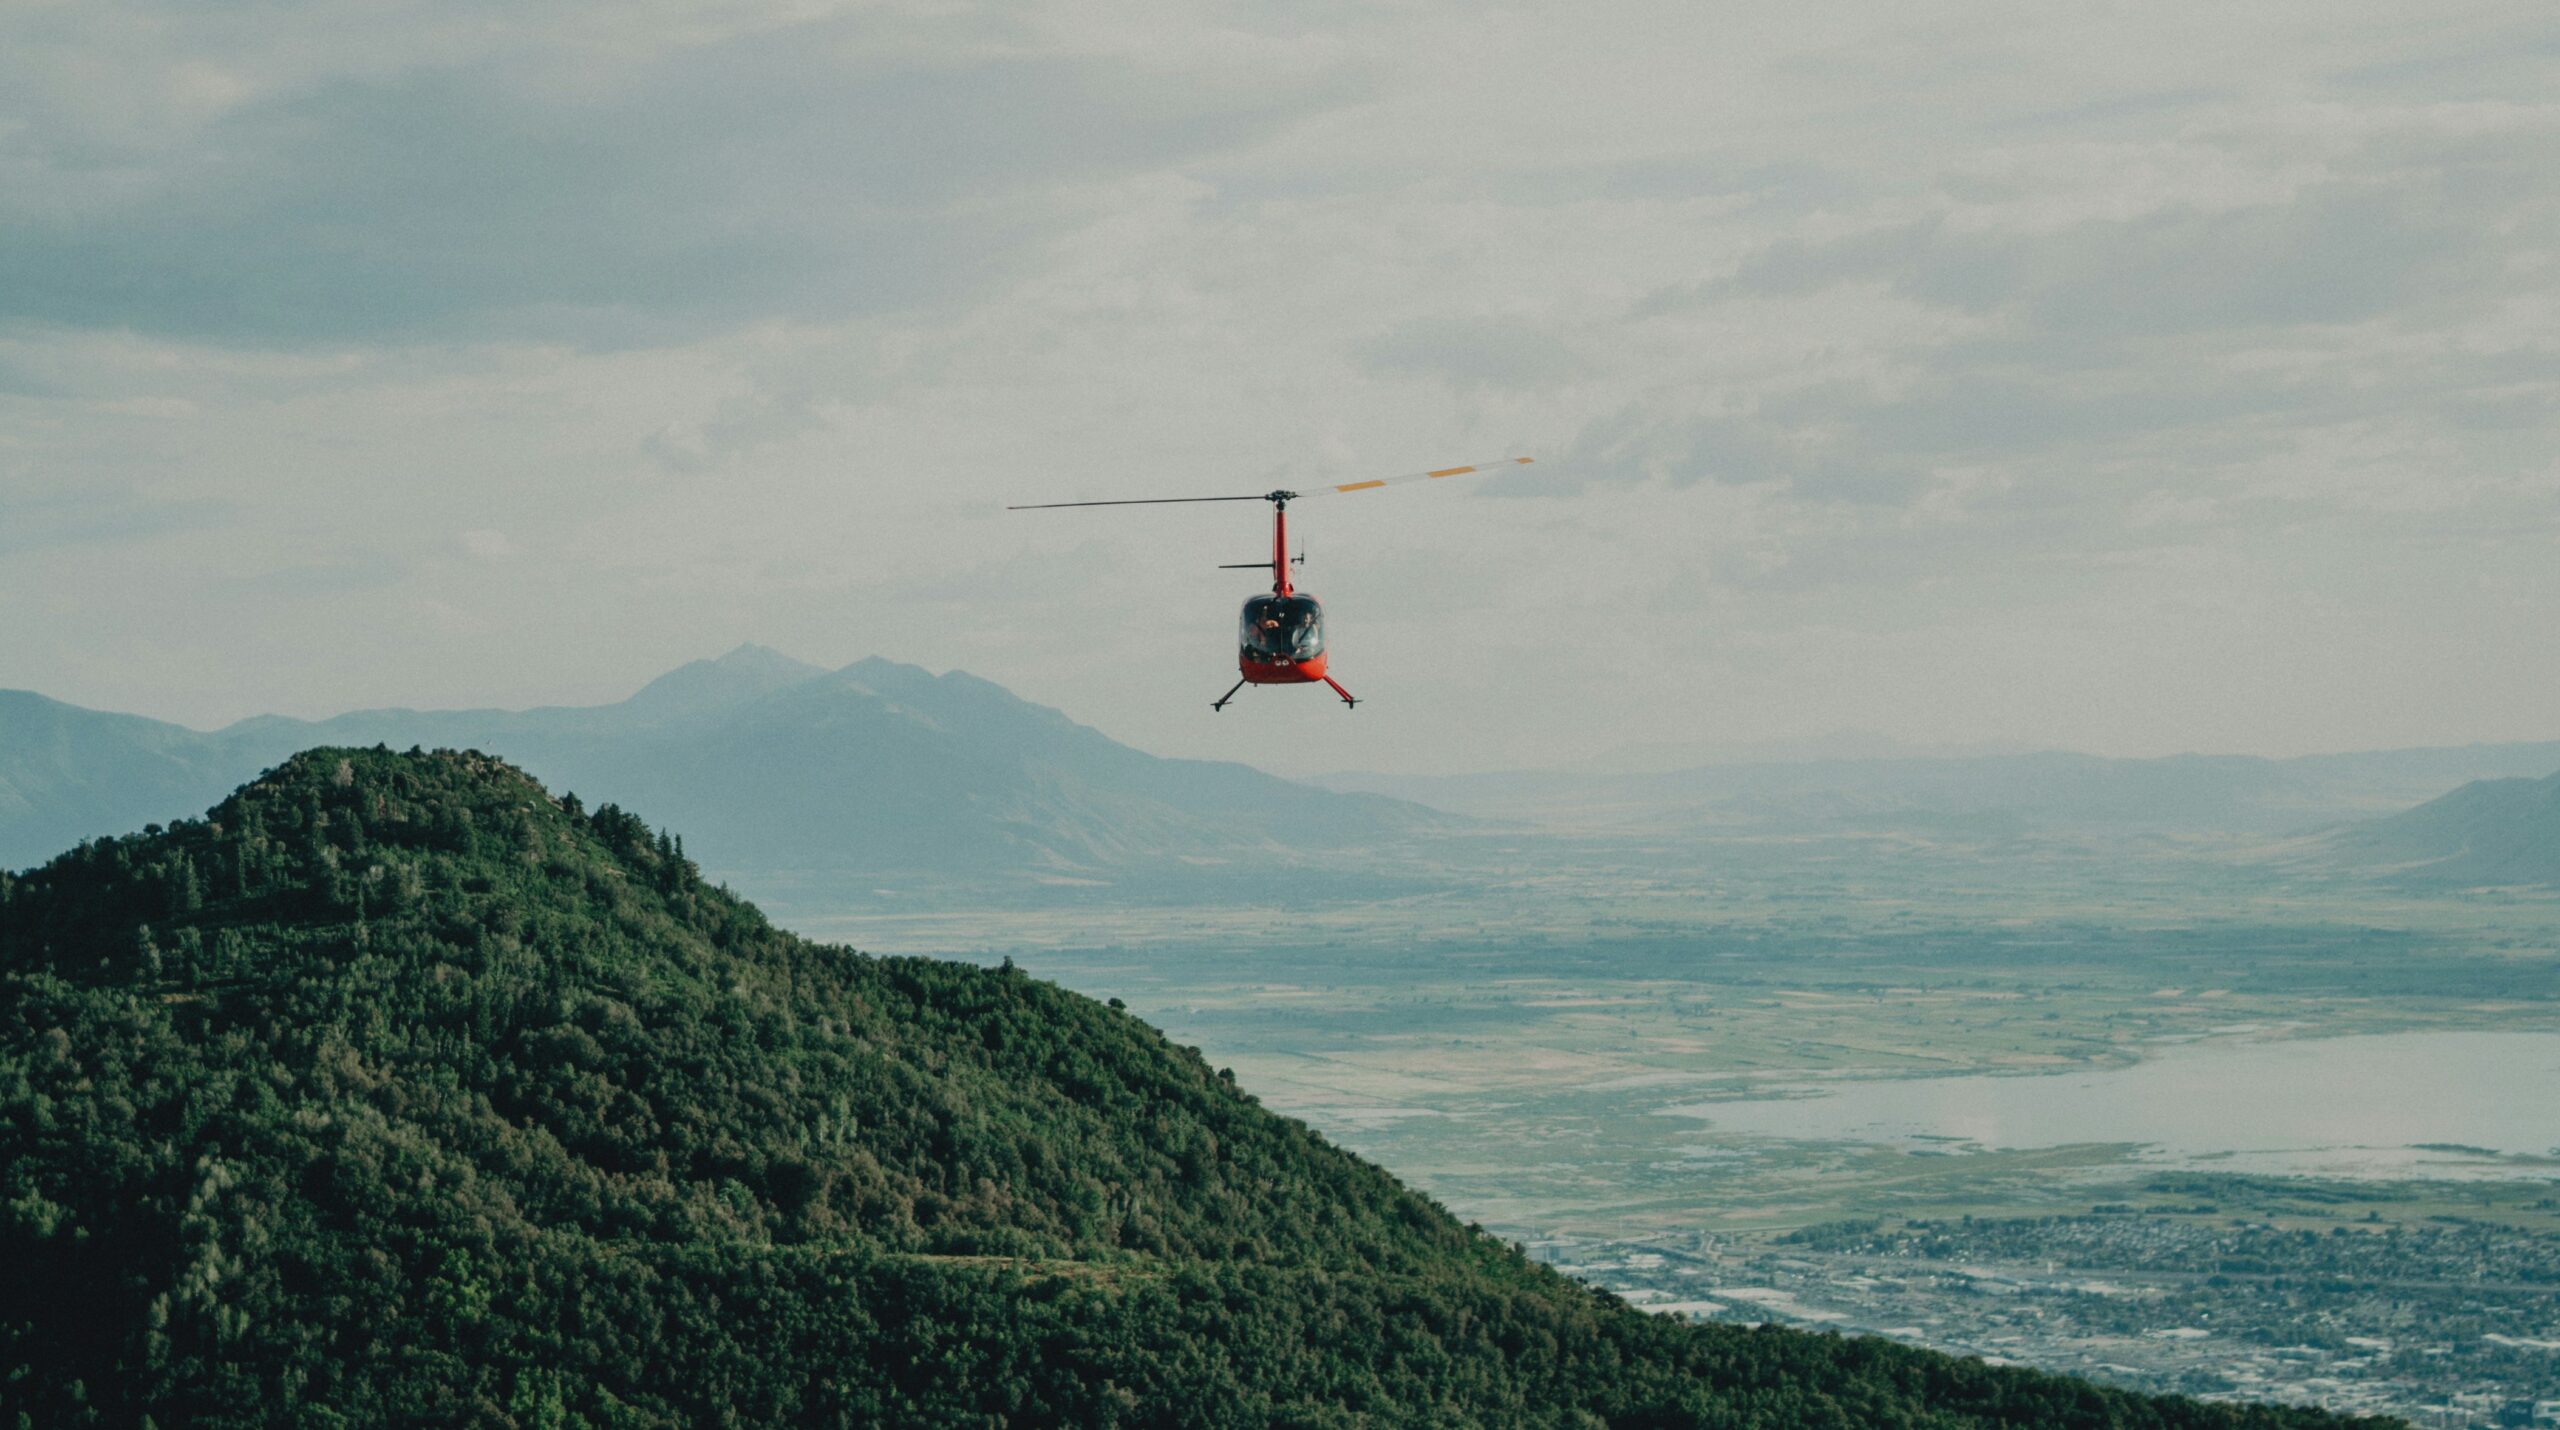 Mount Etna helicopter tour (30 Min)